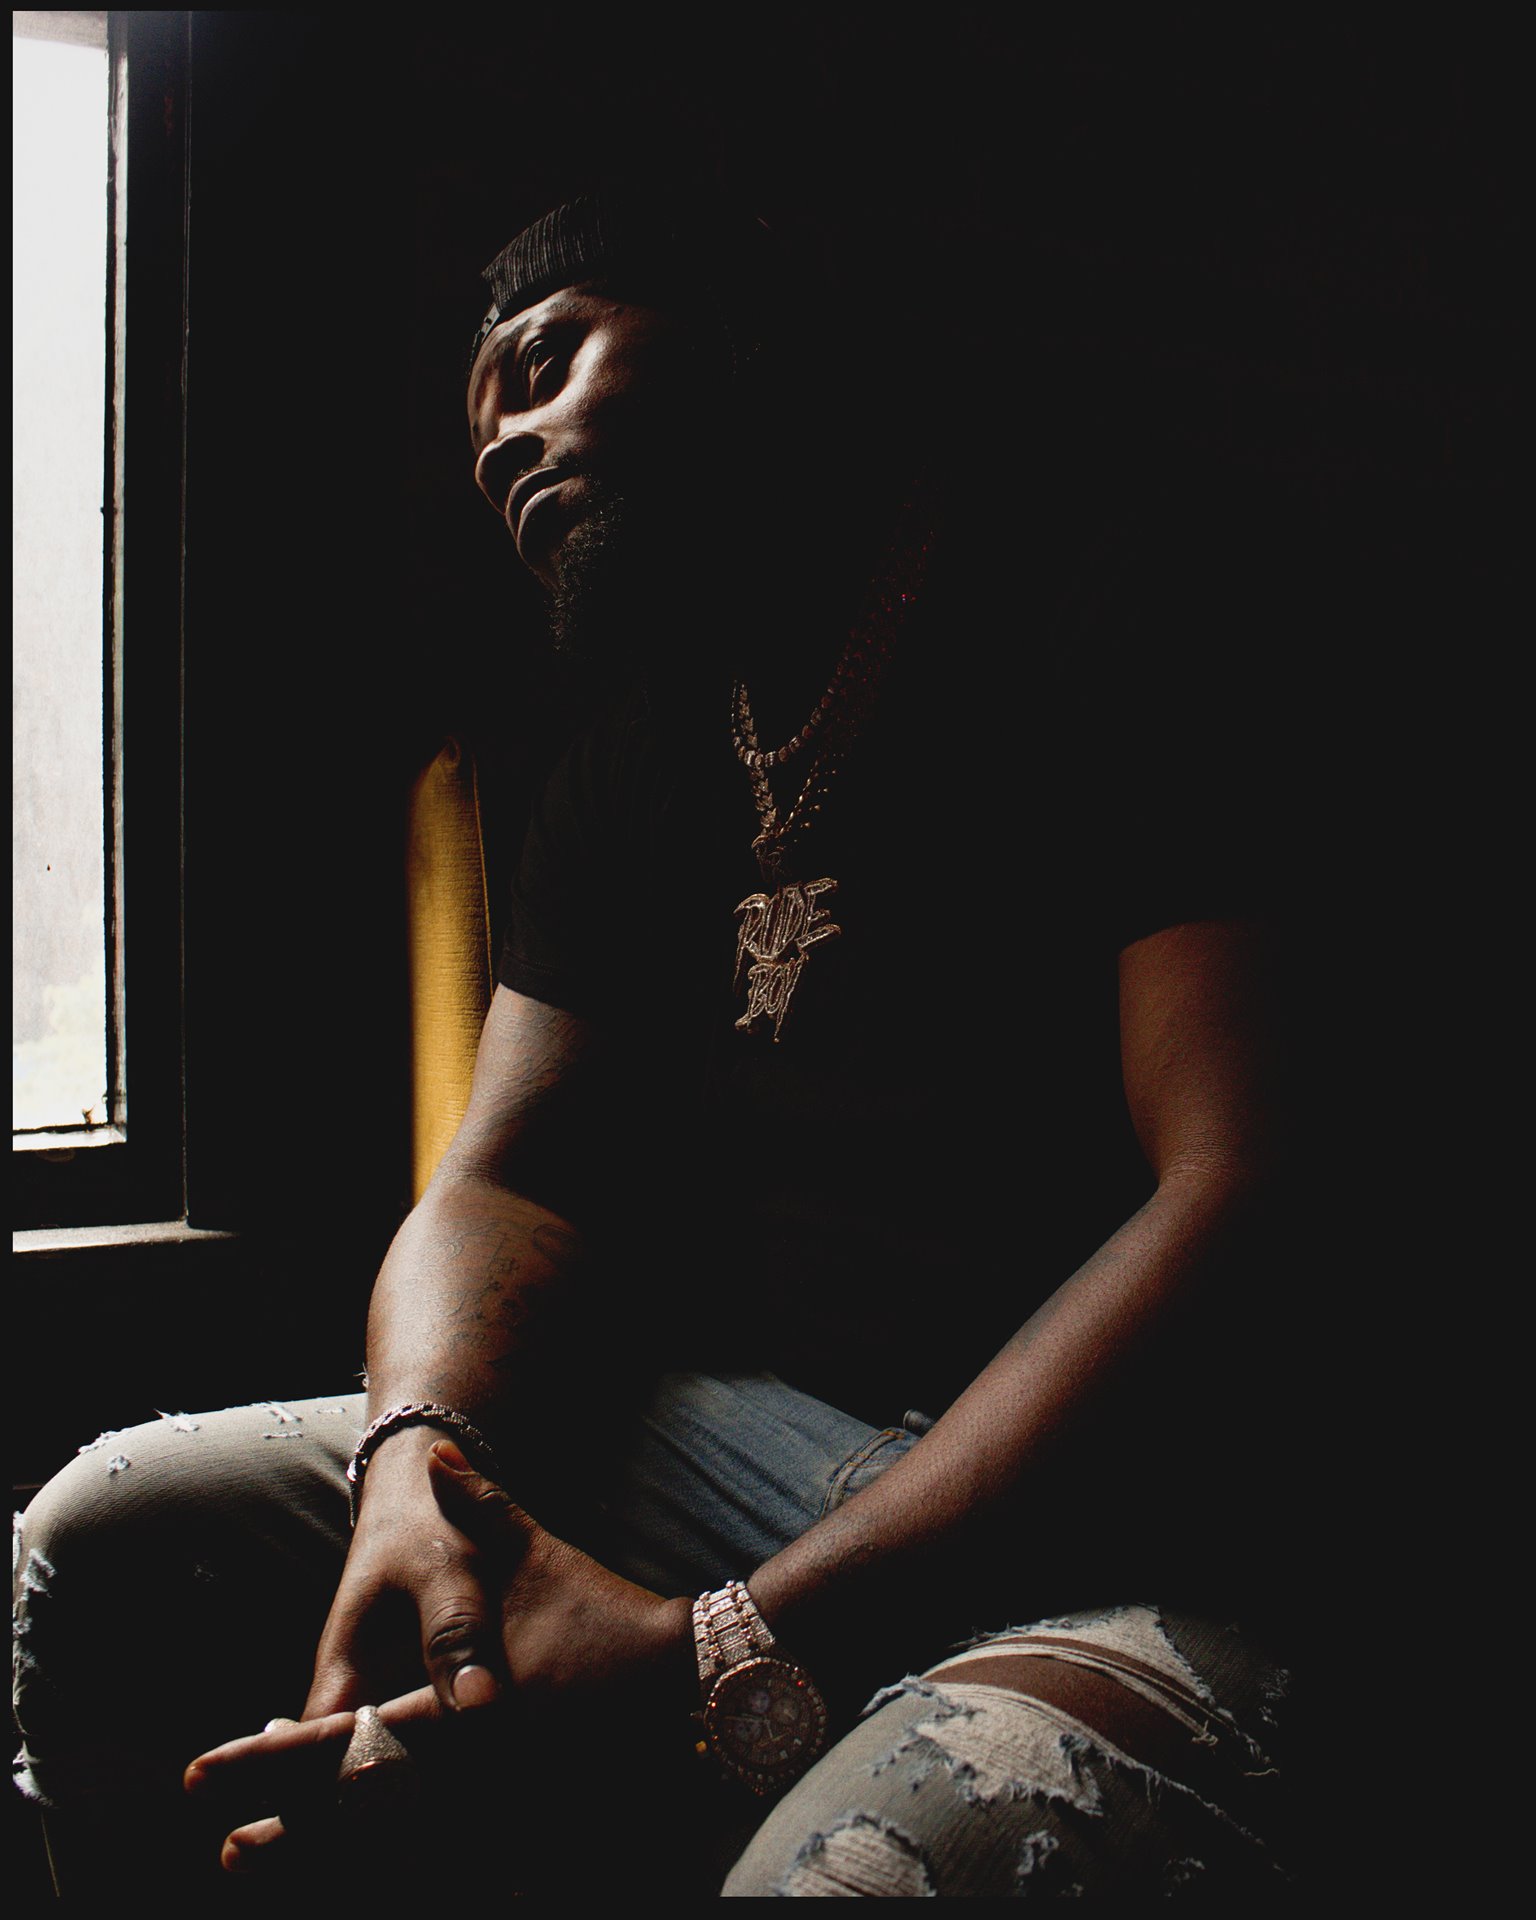 Rowdy Rebel (30) is the co-founder of influential hip-hop collective GS9 and a pioneer in the Brooklyn drill genre. In December 2020, he was released from prison after serving a six year sentence. East Flatbush, New York, United States.&nbsp;